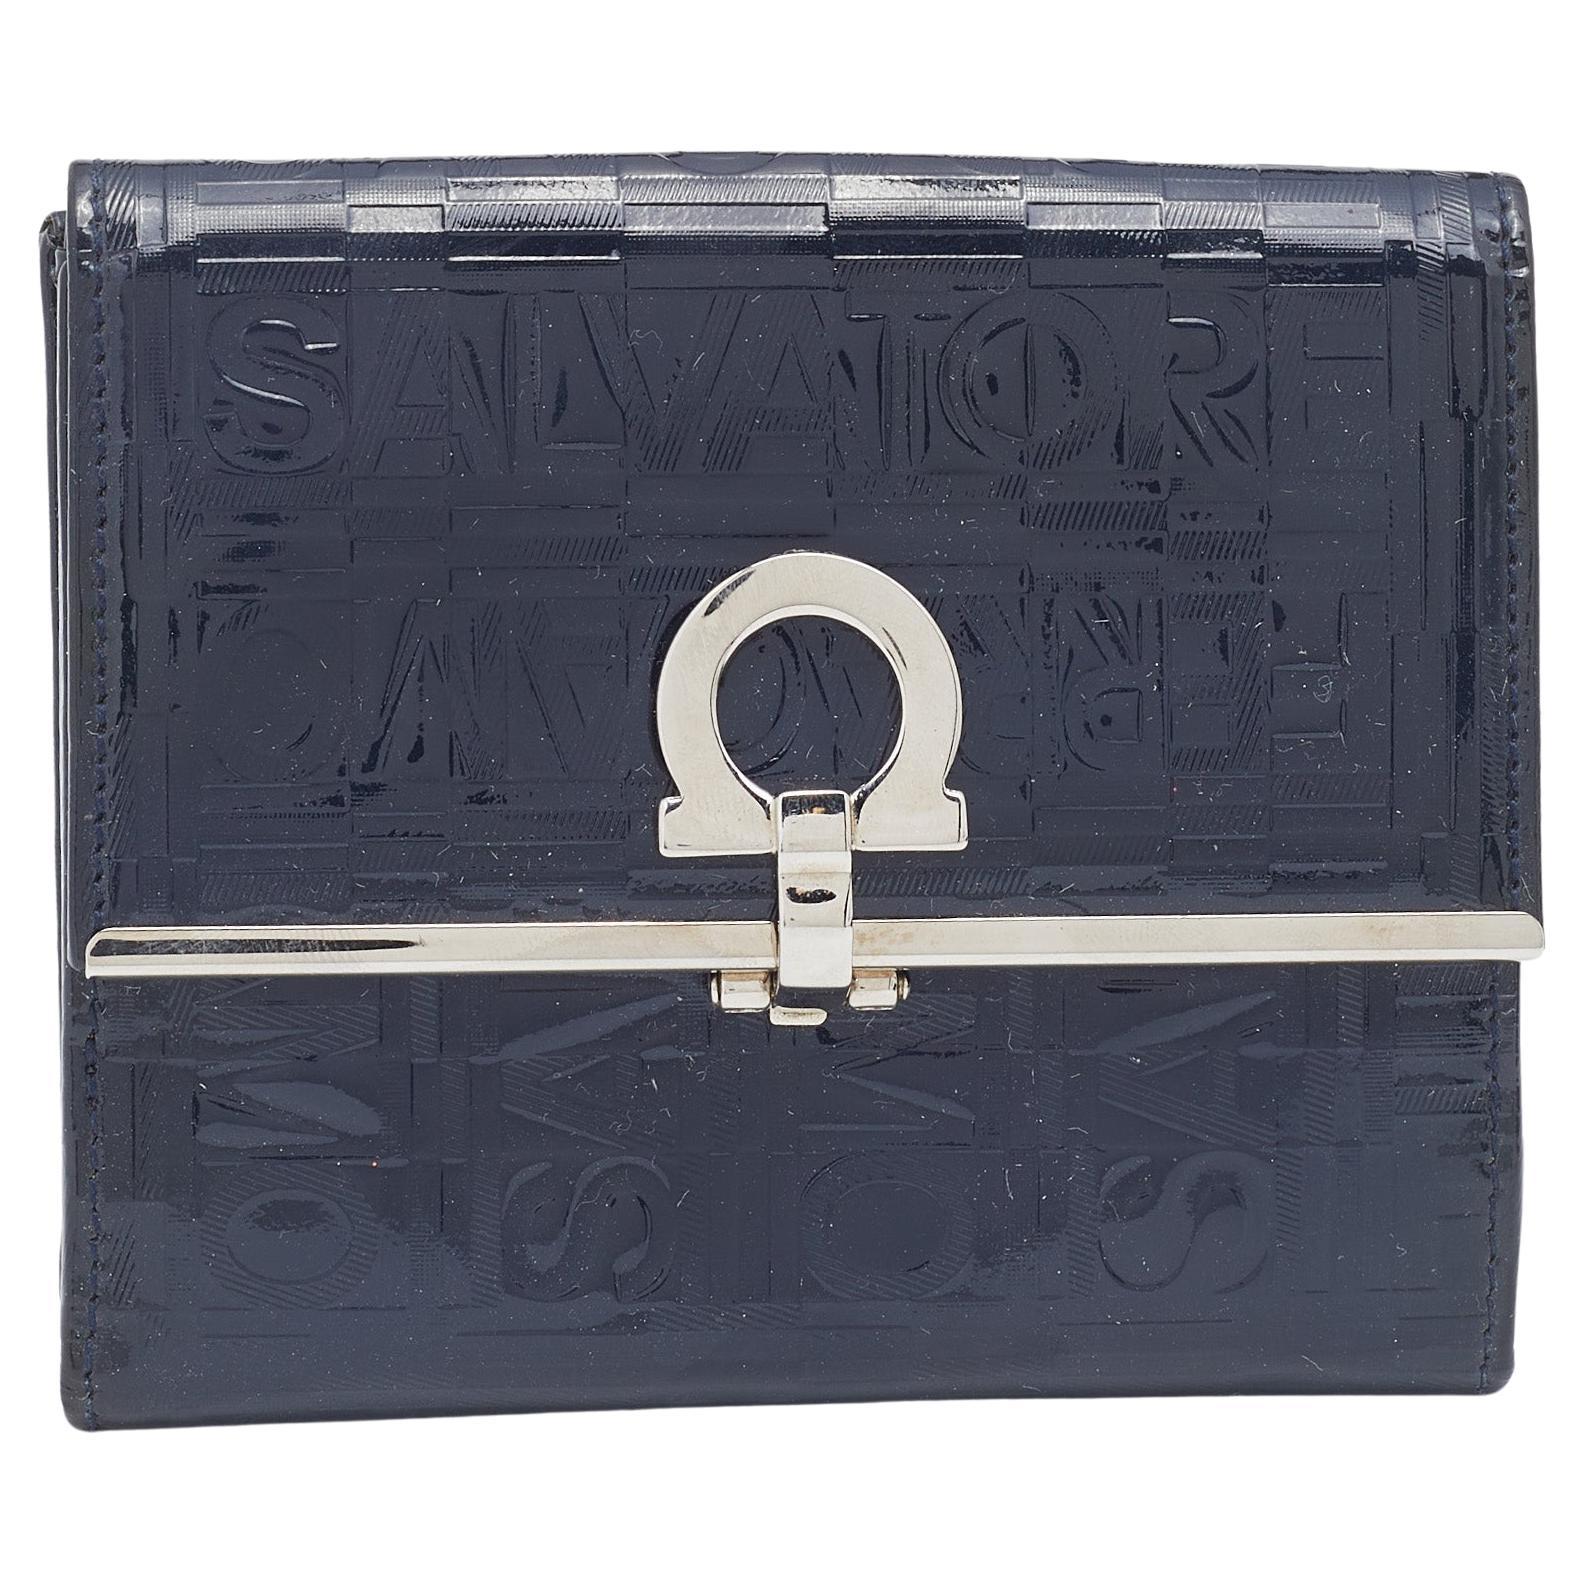 Salvatore Ferragamo Navy Blue Logo Embossed Patent Leather Gancini French Wallet